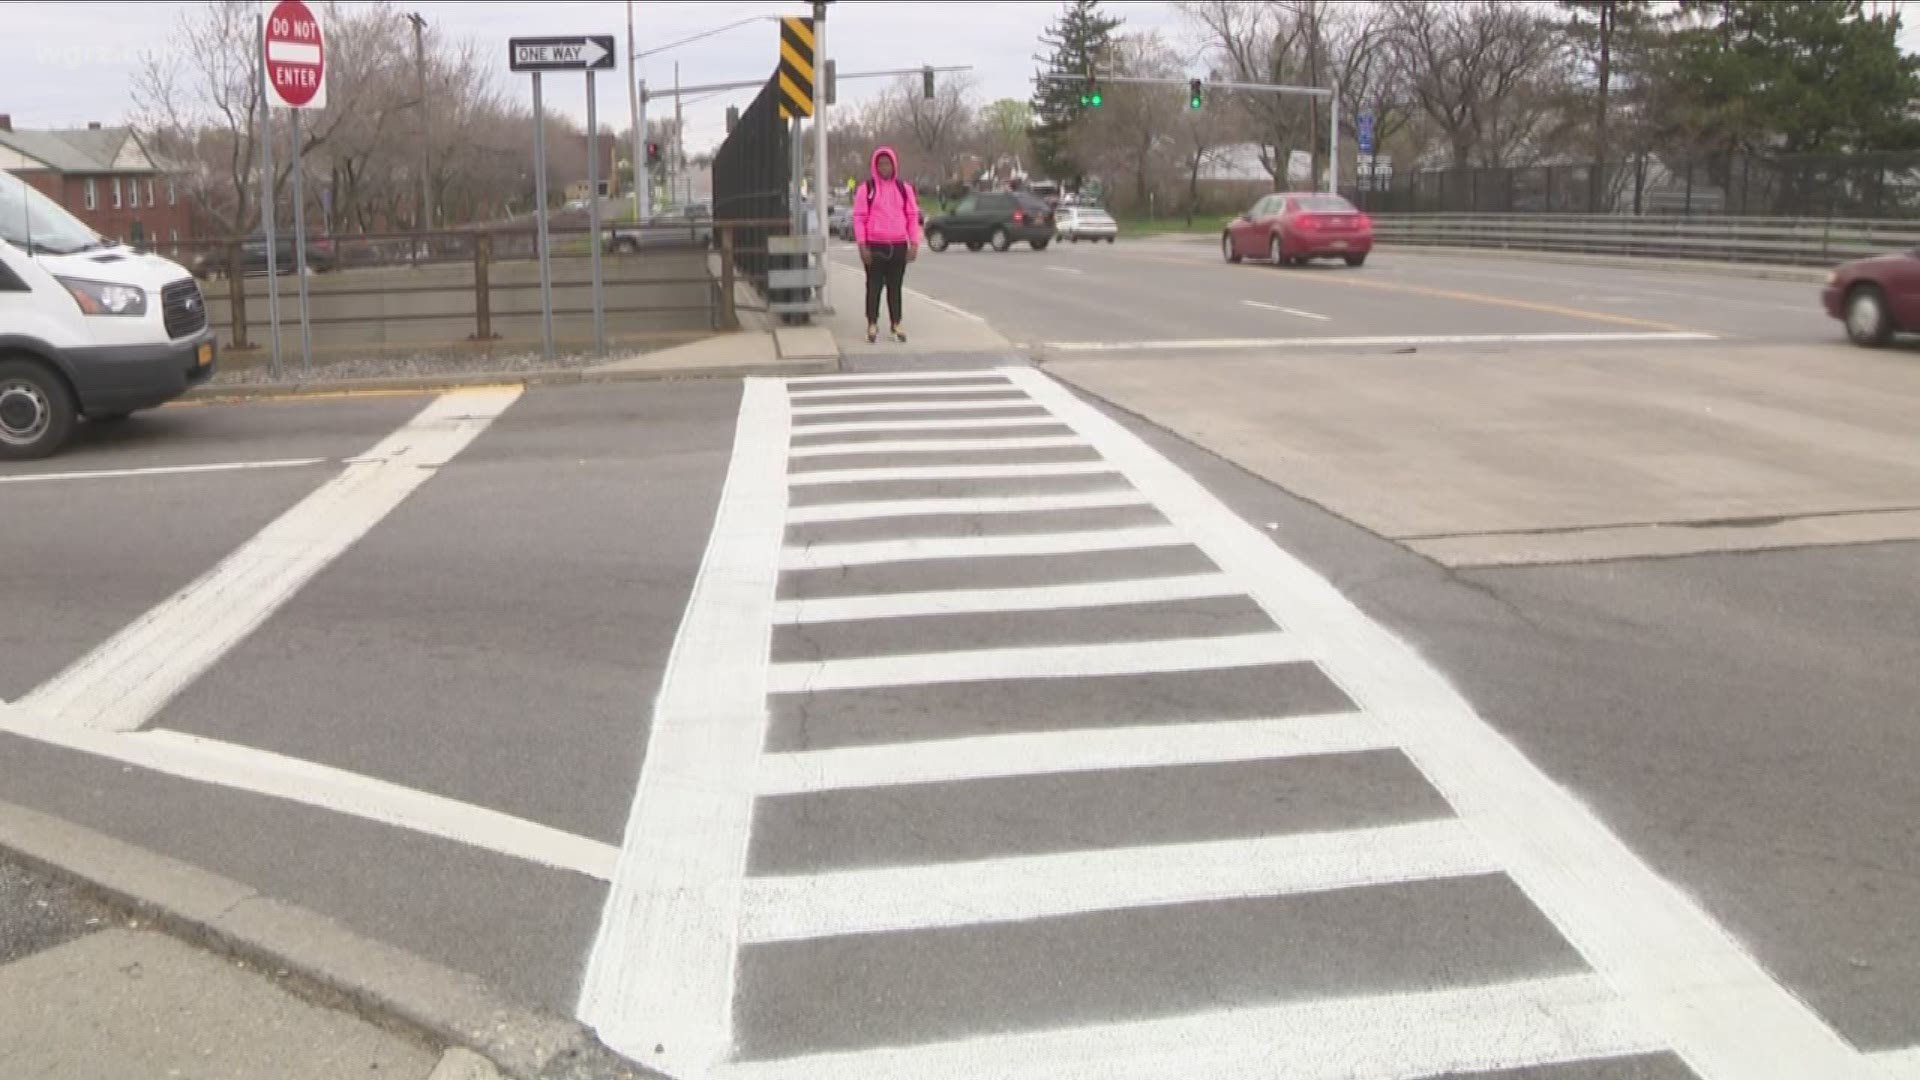 Changes are coming after a 16-year-old was killed at the intersection of Union Road, the 33 last year.